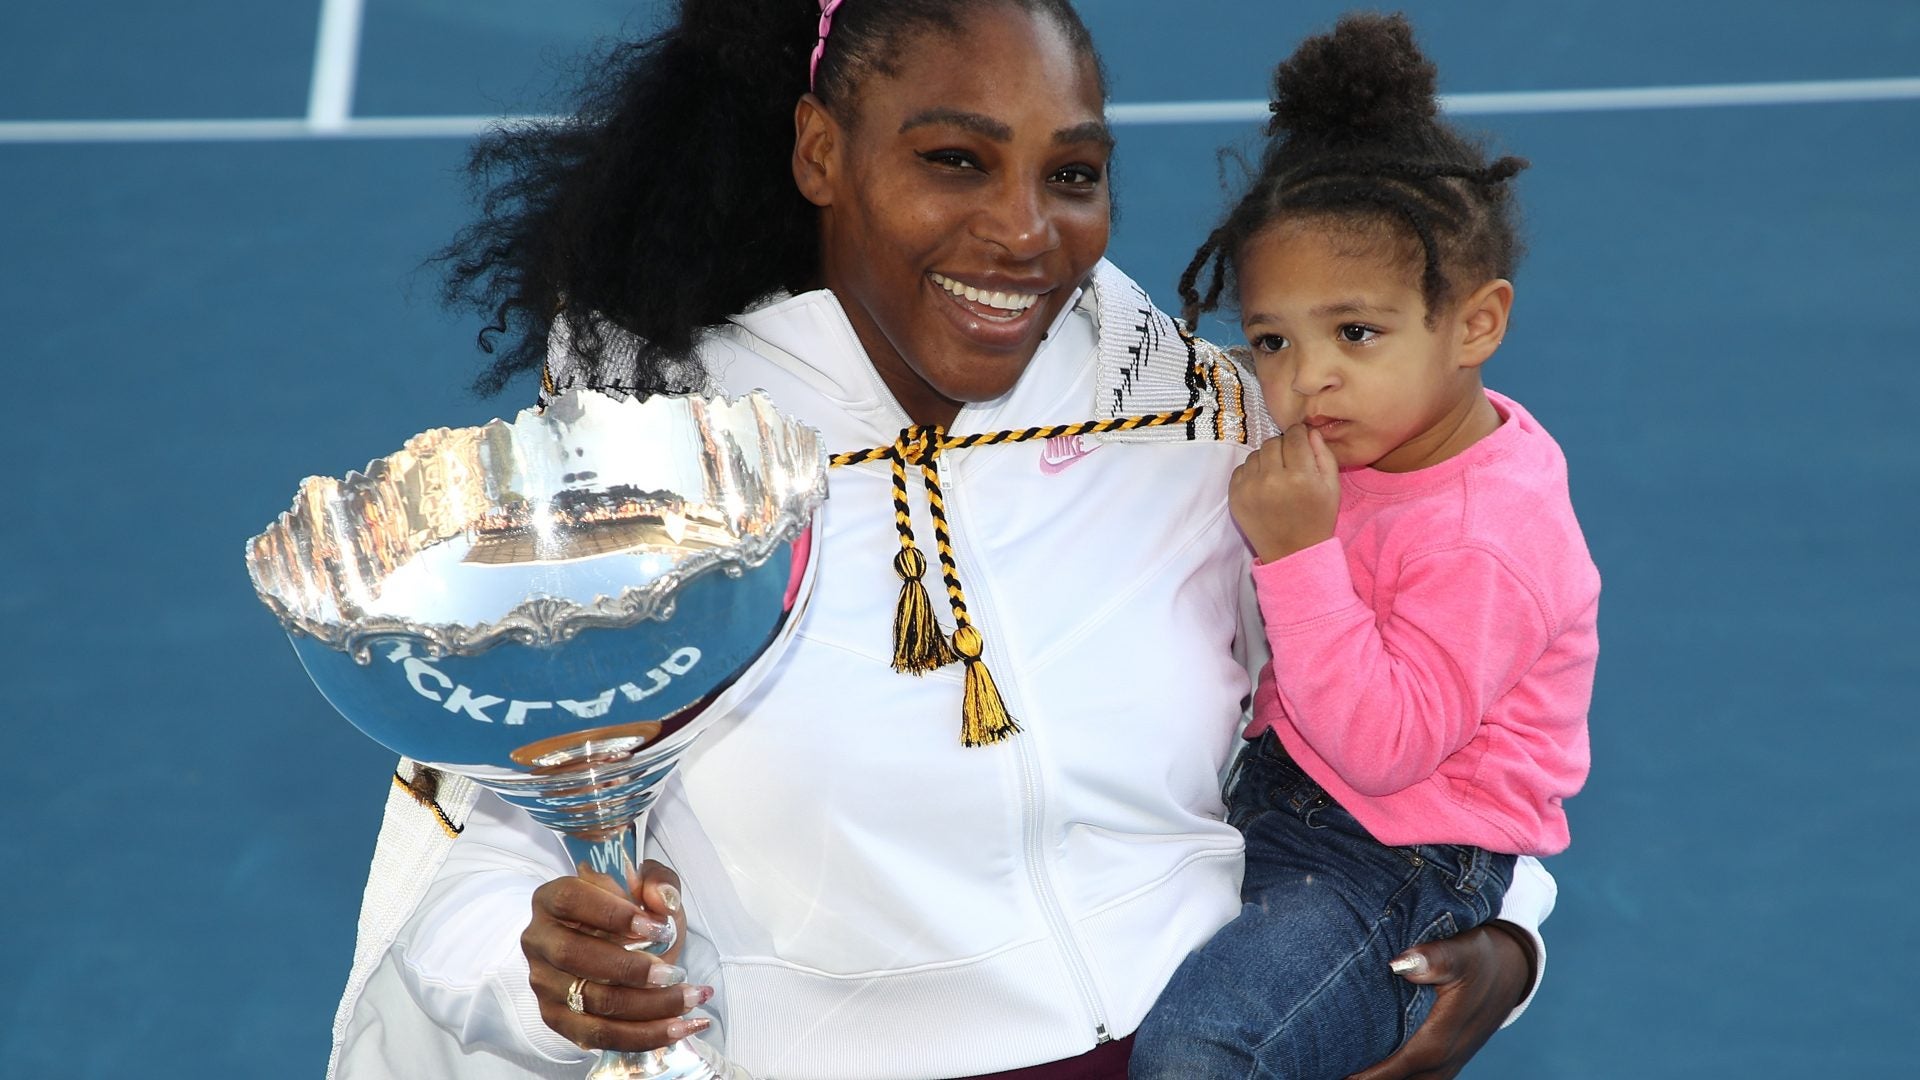 See Serena Williams School Her Cute New Double's Partner